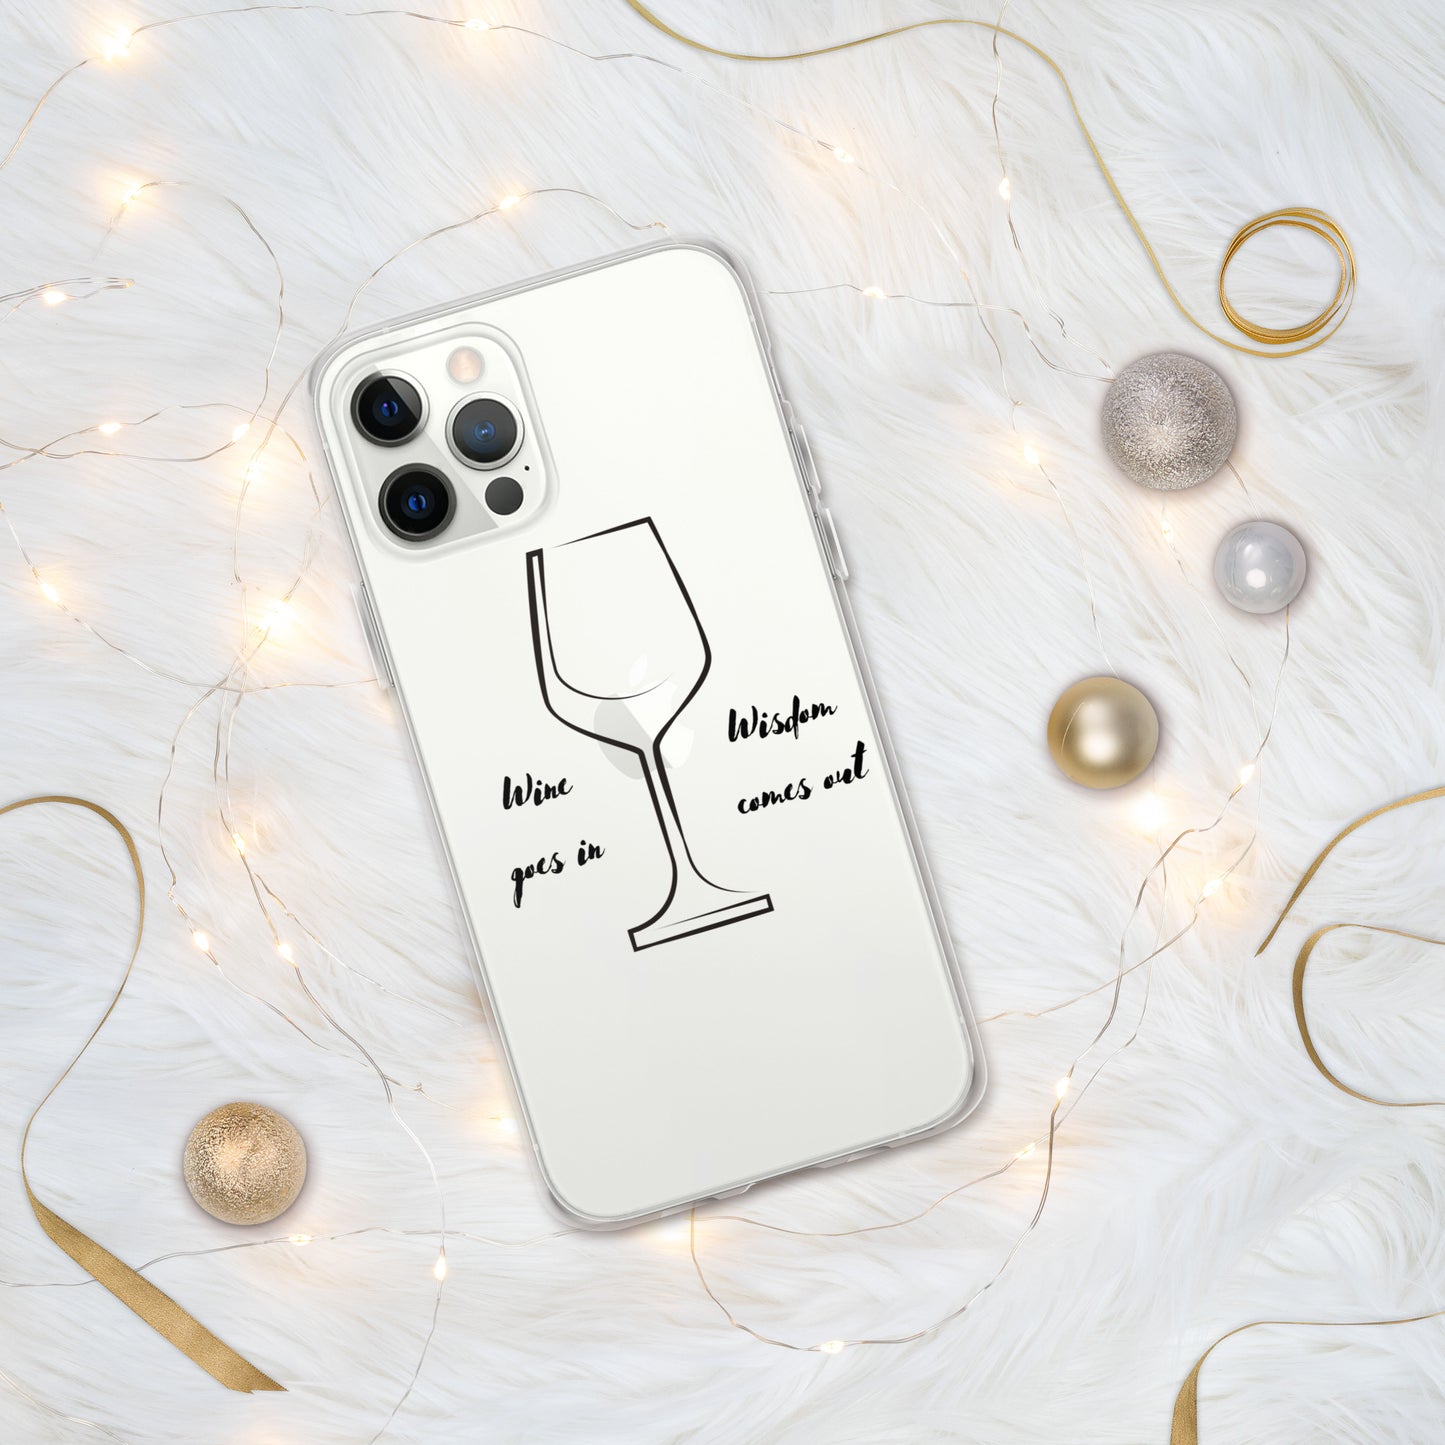 Wine goes in Wisdom comes out - iPhone Case